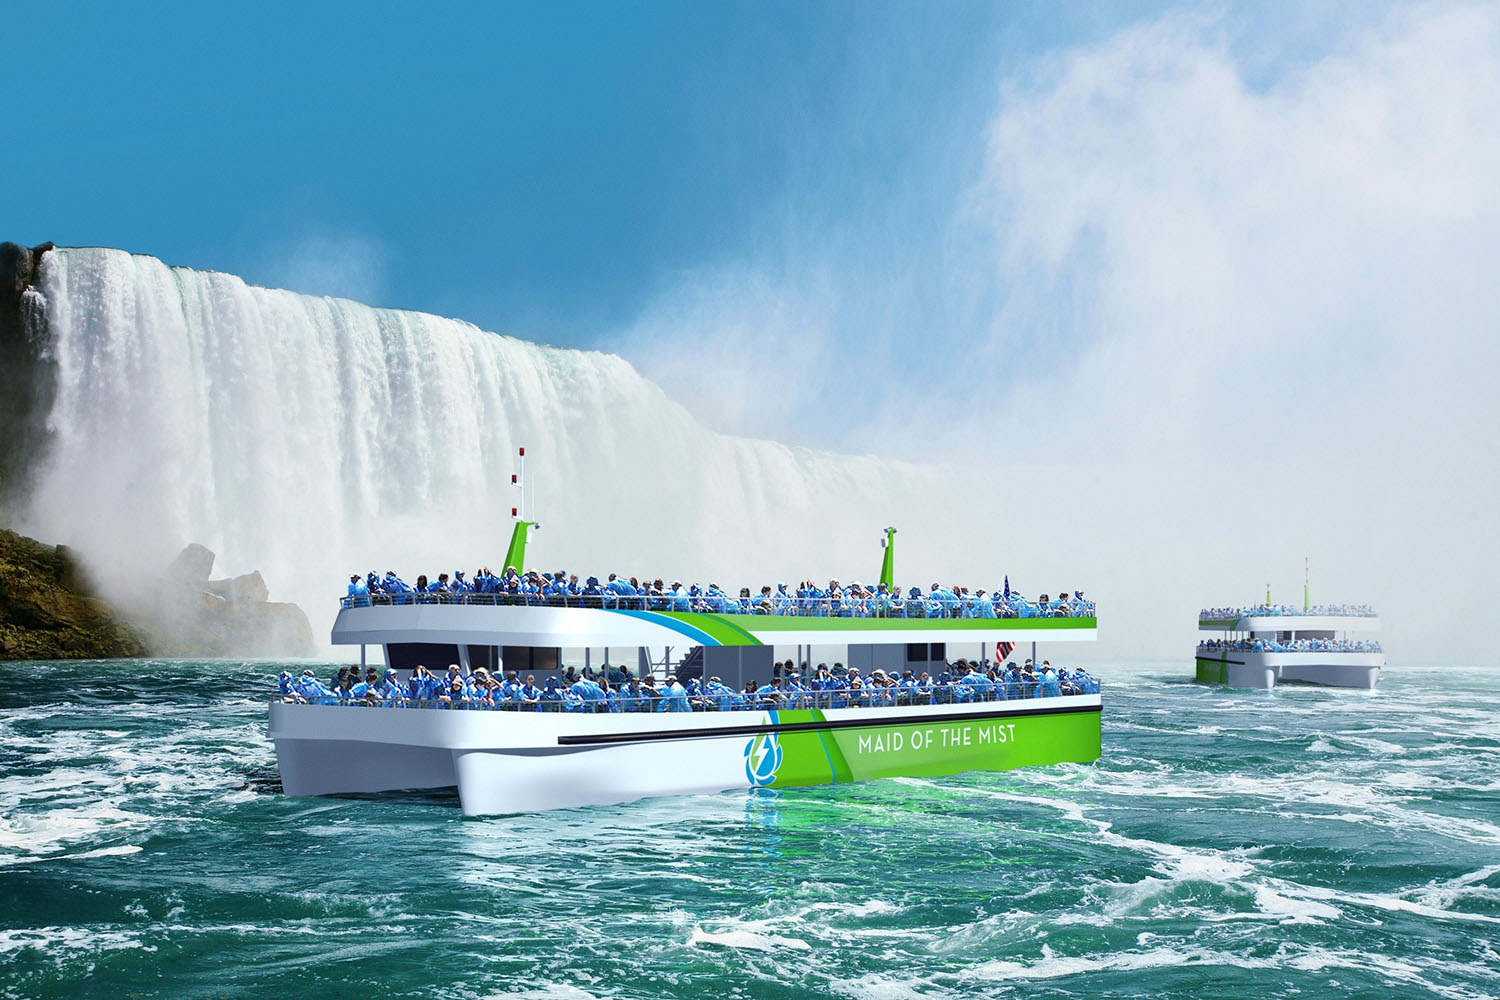 Maid of the Mist leads the way with first allelectric vessels built in